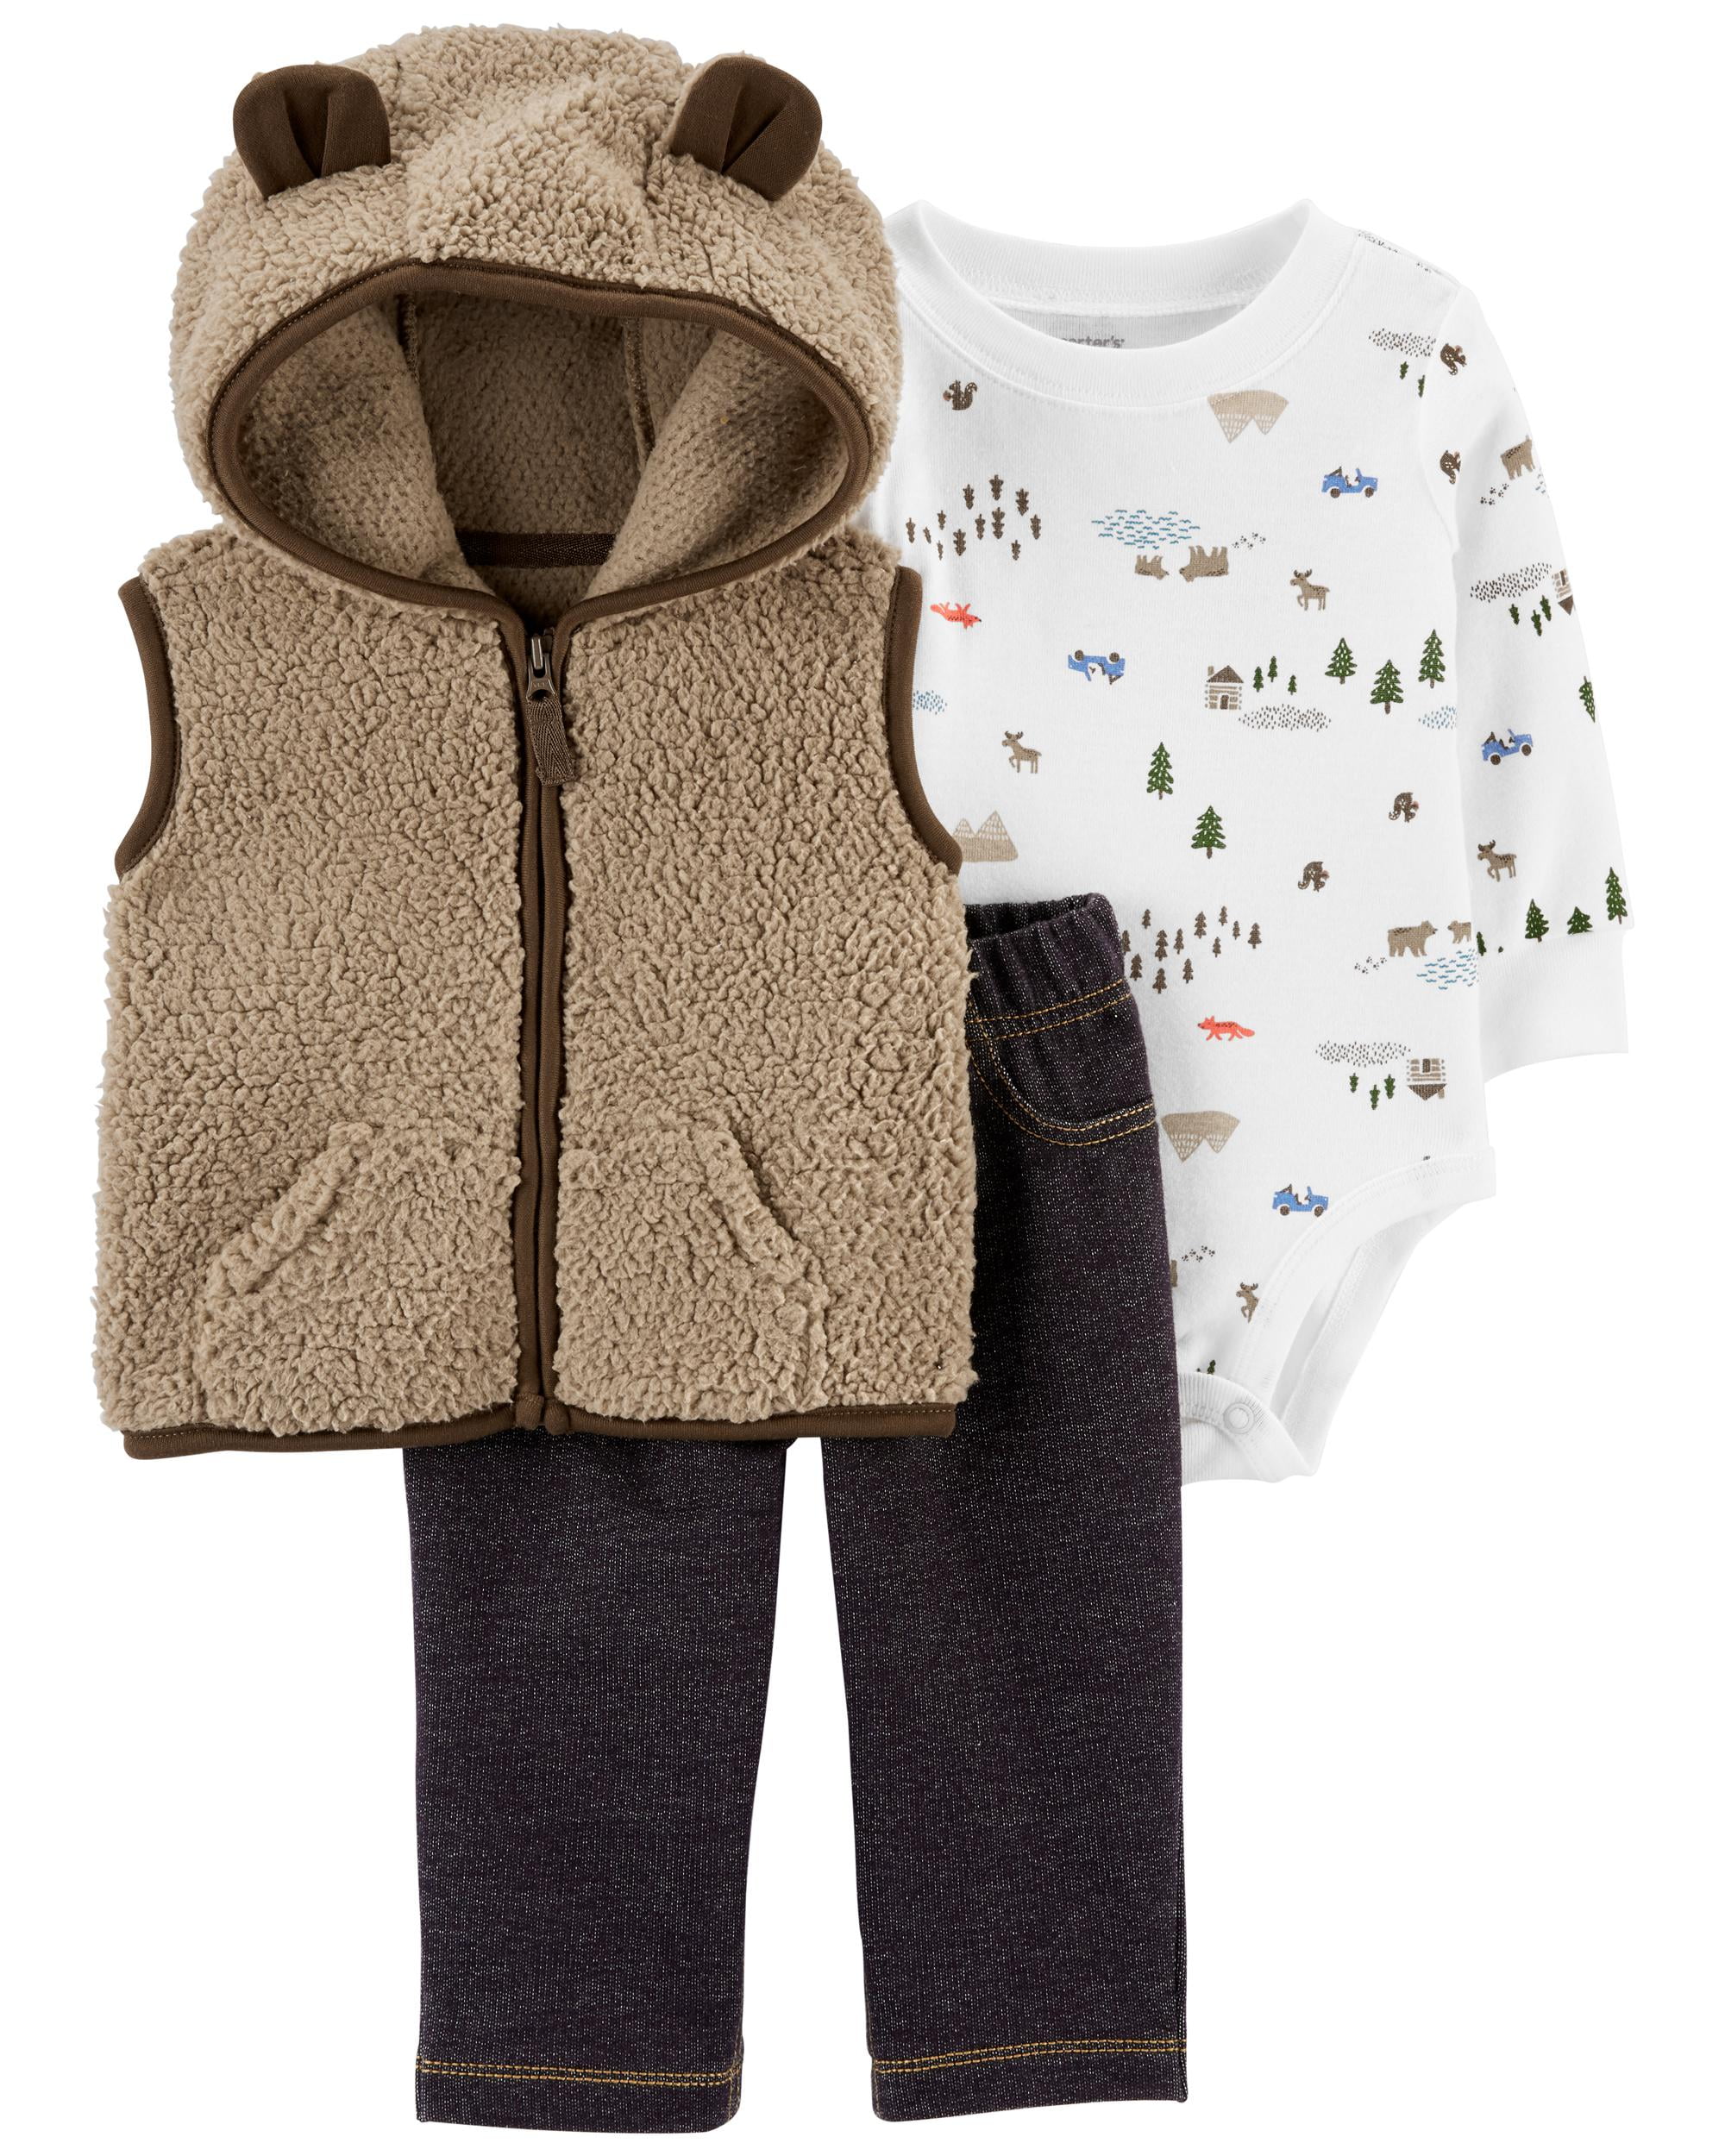 Carters Baby Boy 3 Piece Vest Set Fall Outfit 6 Months NEW 